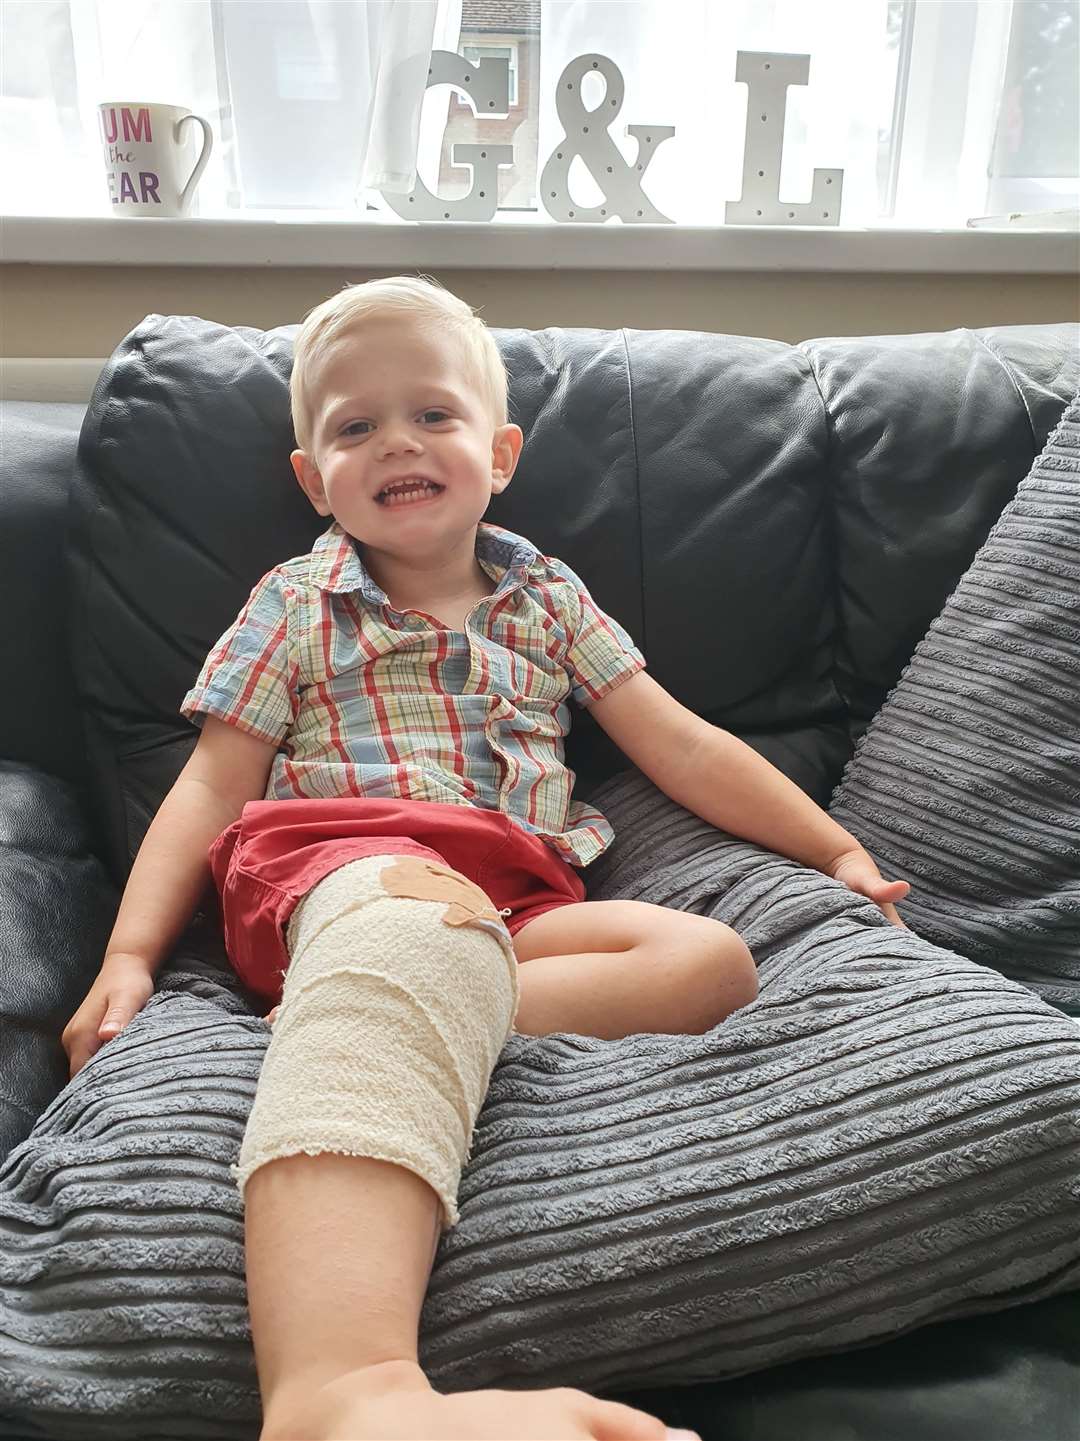 Hadley Waters is now recovering at home after surgery